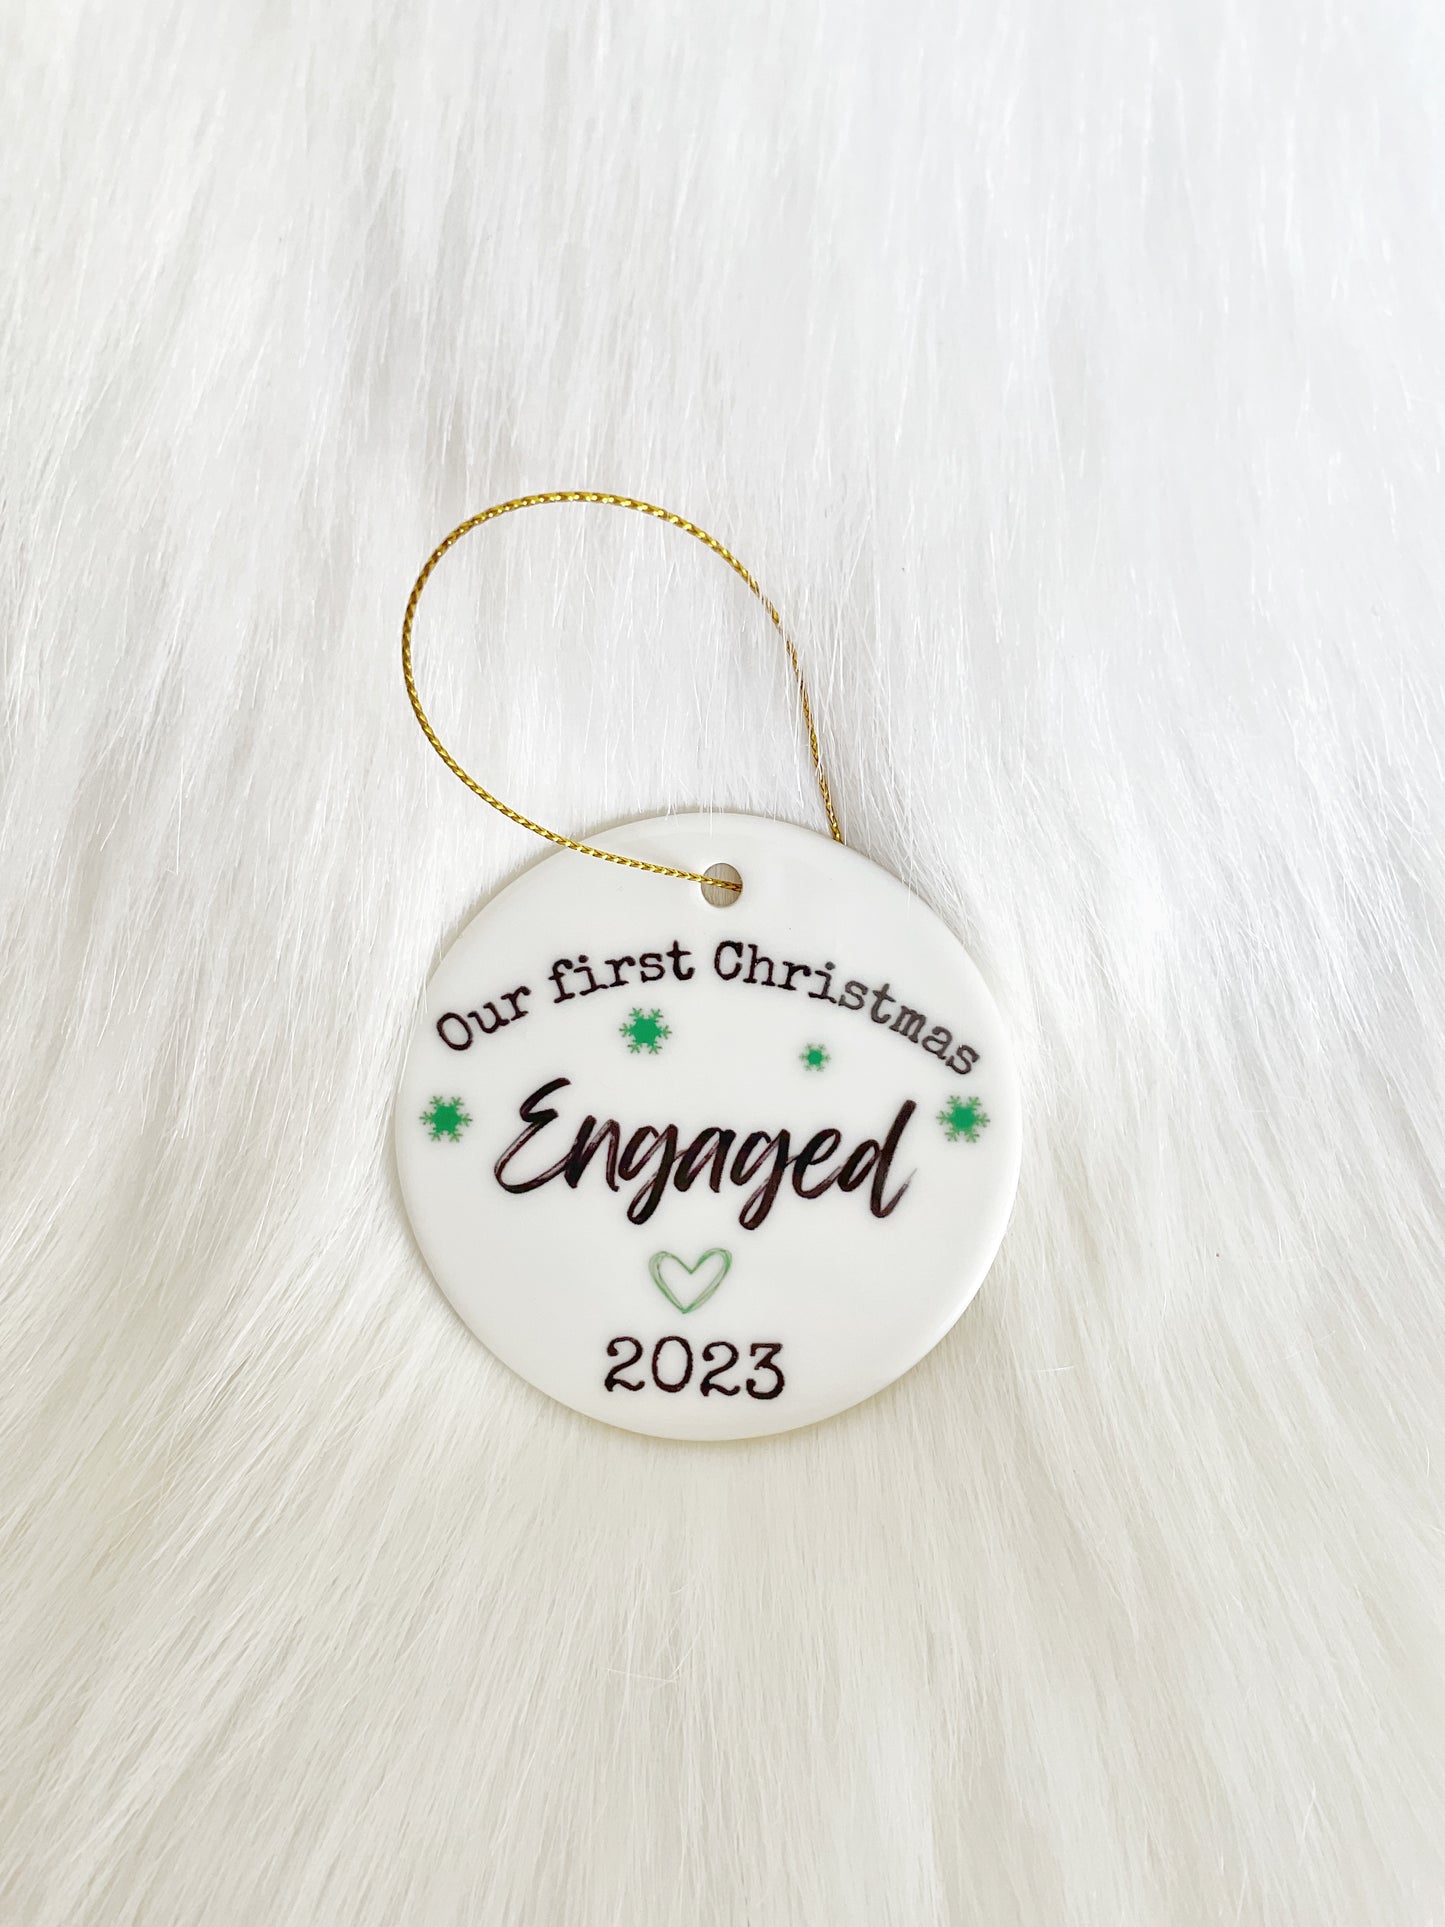 Our first Christmas engaged 2023 - Ceramic decoration